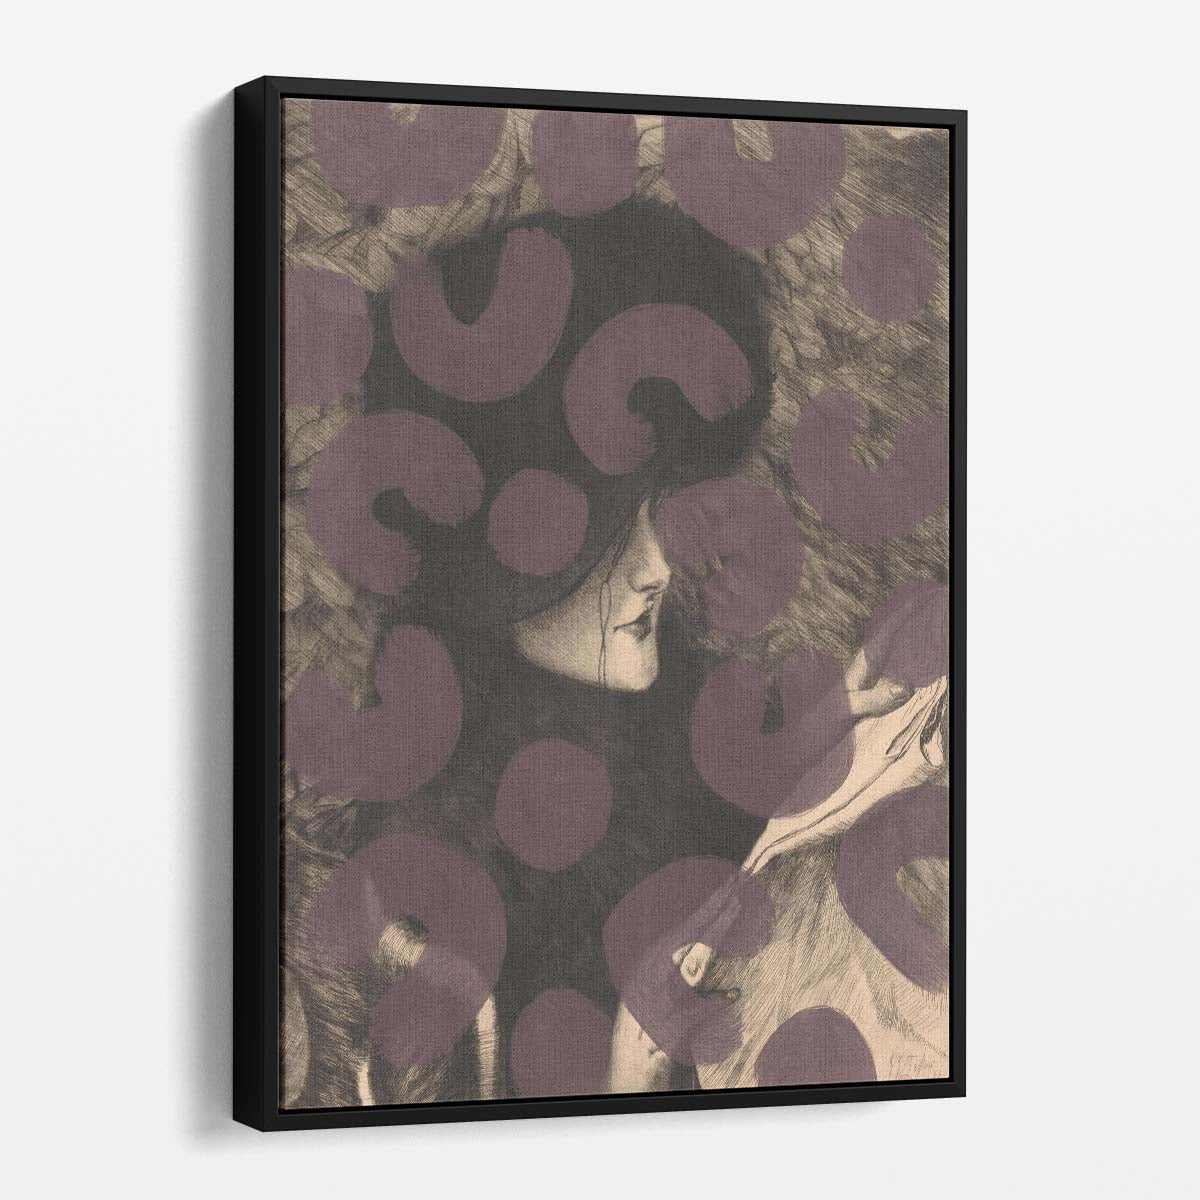 Romantic Modern Abstract Woman Illustration Art by Yopie Studio by Luxuriance Designs, made in USA